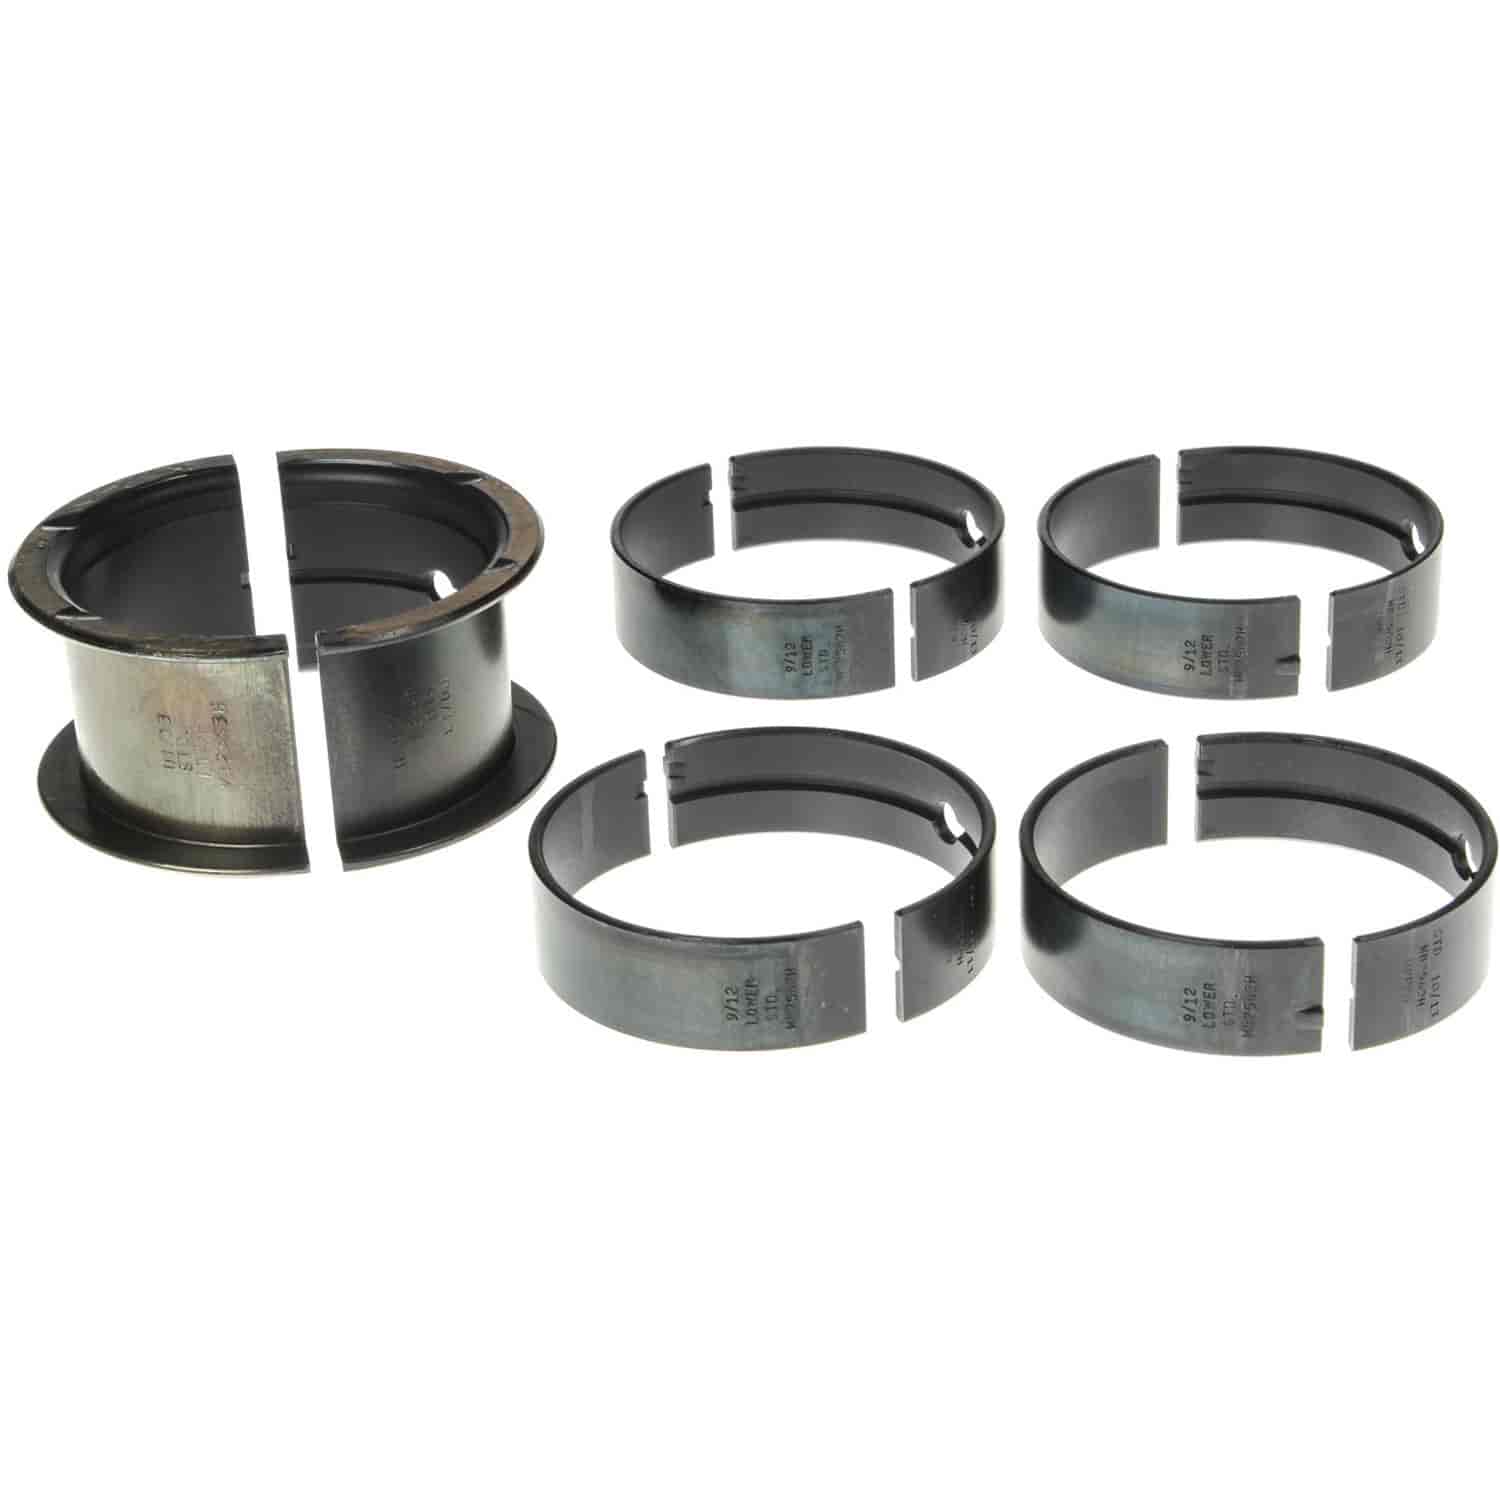 Main Bearing Set Chevy 1970-1980 V8 400 with Standard Size